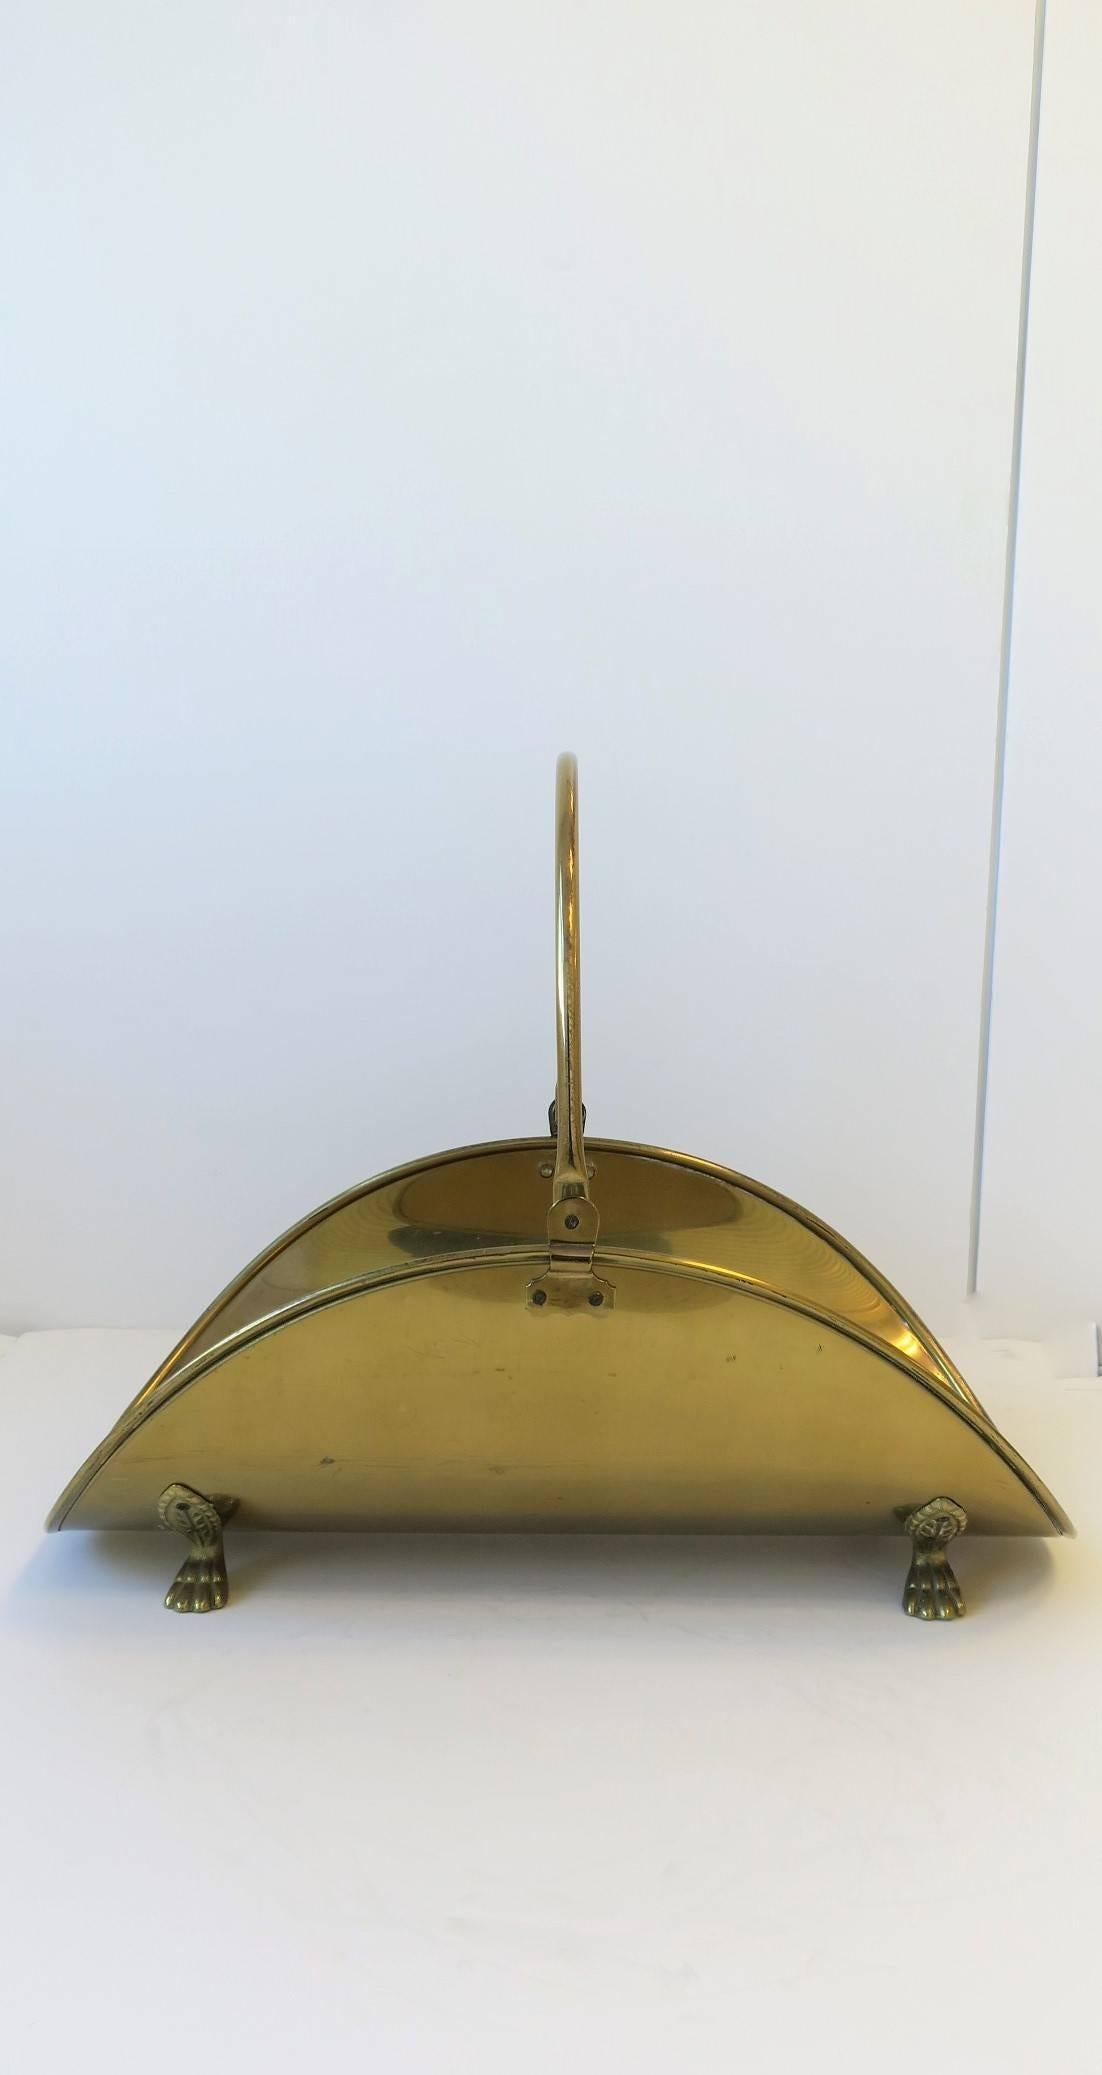 A vintage Regency style brass fire wood log holder with paw feet. 

Piece measures: 
17 in. H to top of Handle x 22 in. D x 12.5 in. W
8 in. H to top of Basket x 22 in. D x 12.5 in. W

Item available here online. By request, item can be made